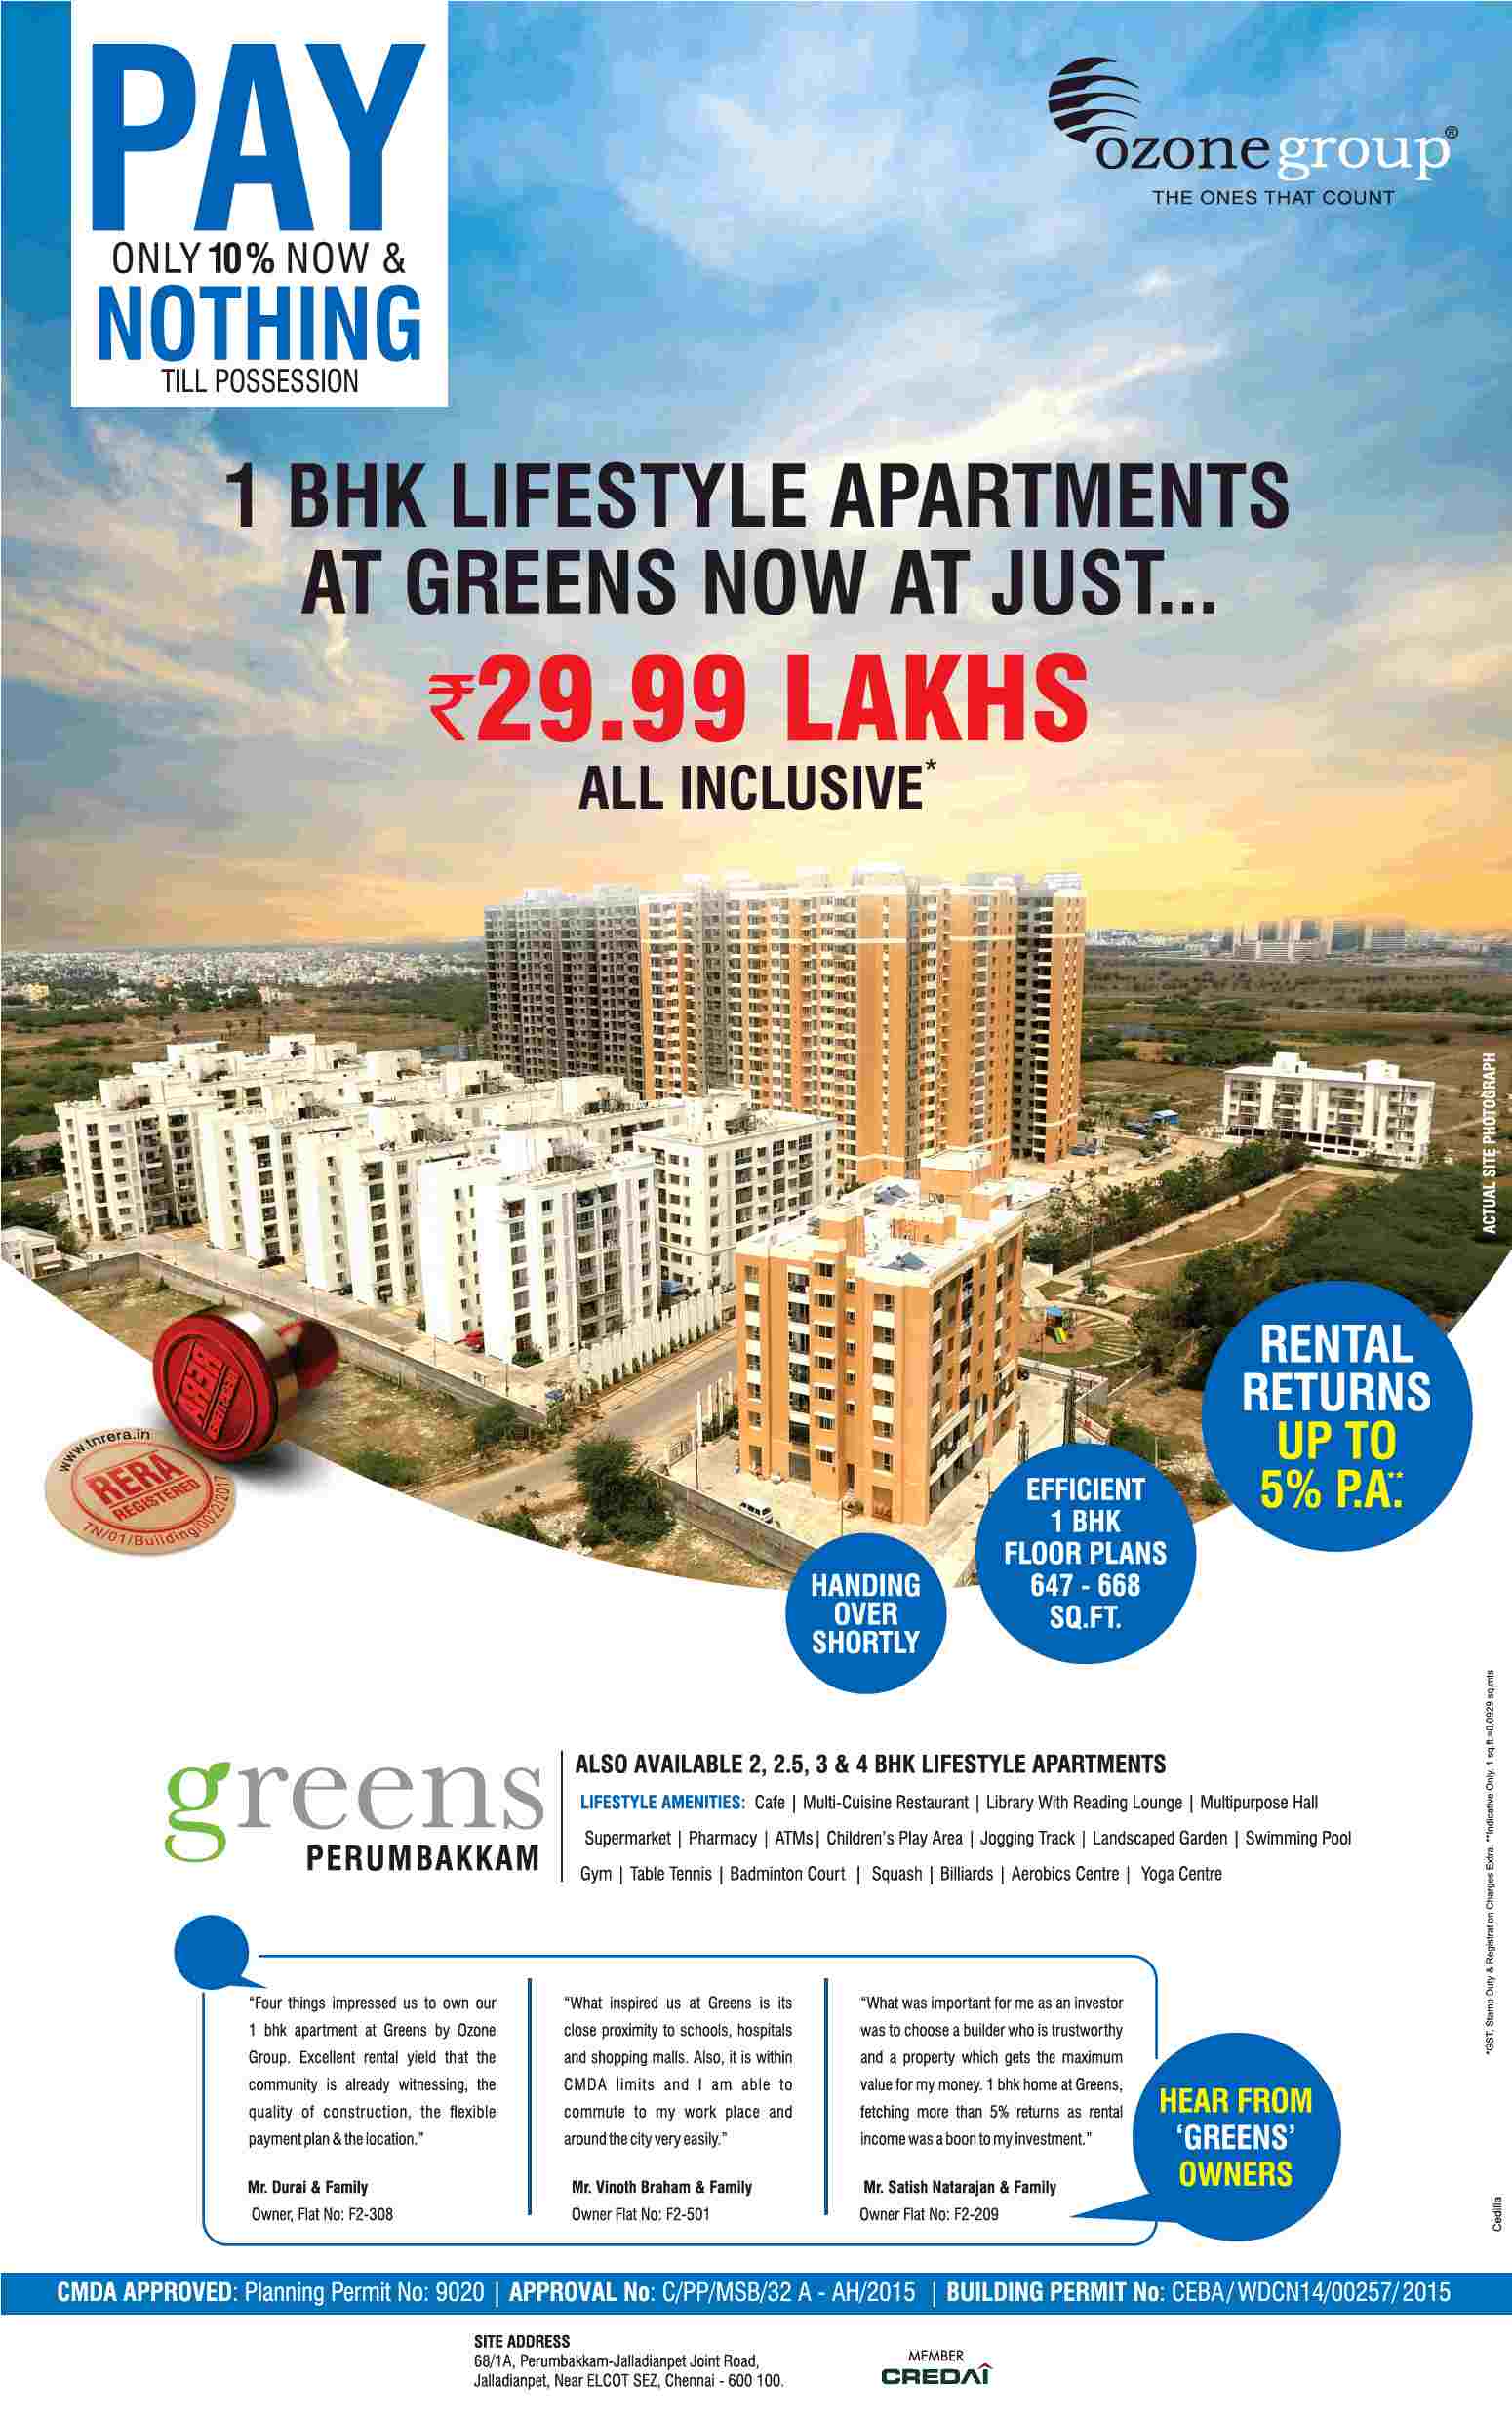 Earn rental returns up to 5% per annum at Ozone Greens in Chennai